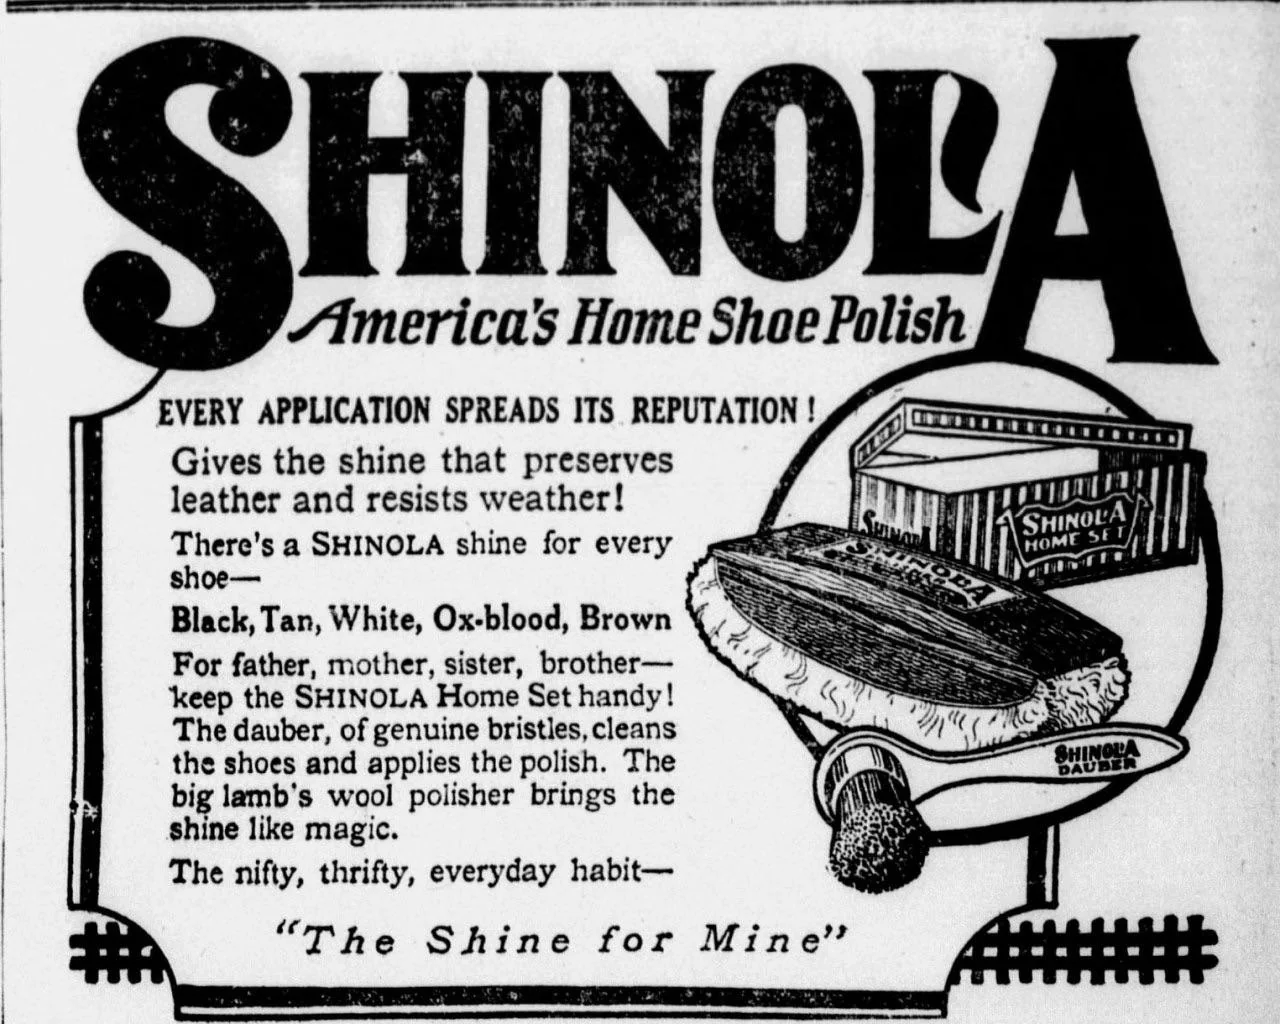 EVERY APPLICATION SPREADS ITS REPUTATION! Gives the shine that preserves leather and resists weather! There's a SHINOLA shine for every shoe. Black, Tan, White, Ox-blood, Brown For father, mother, sister, brother- keep the SHINOLA Home Set handy! The dauber, of genuine bristles, cleans the shoes and applies the polish. The big lamb's wool polisher brings the shine like magic. The nifty, thrifty, everyday habit-